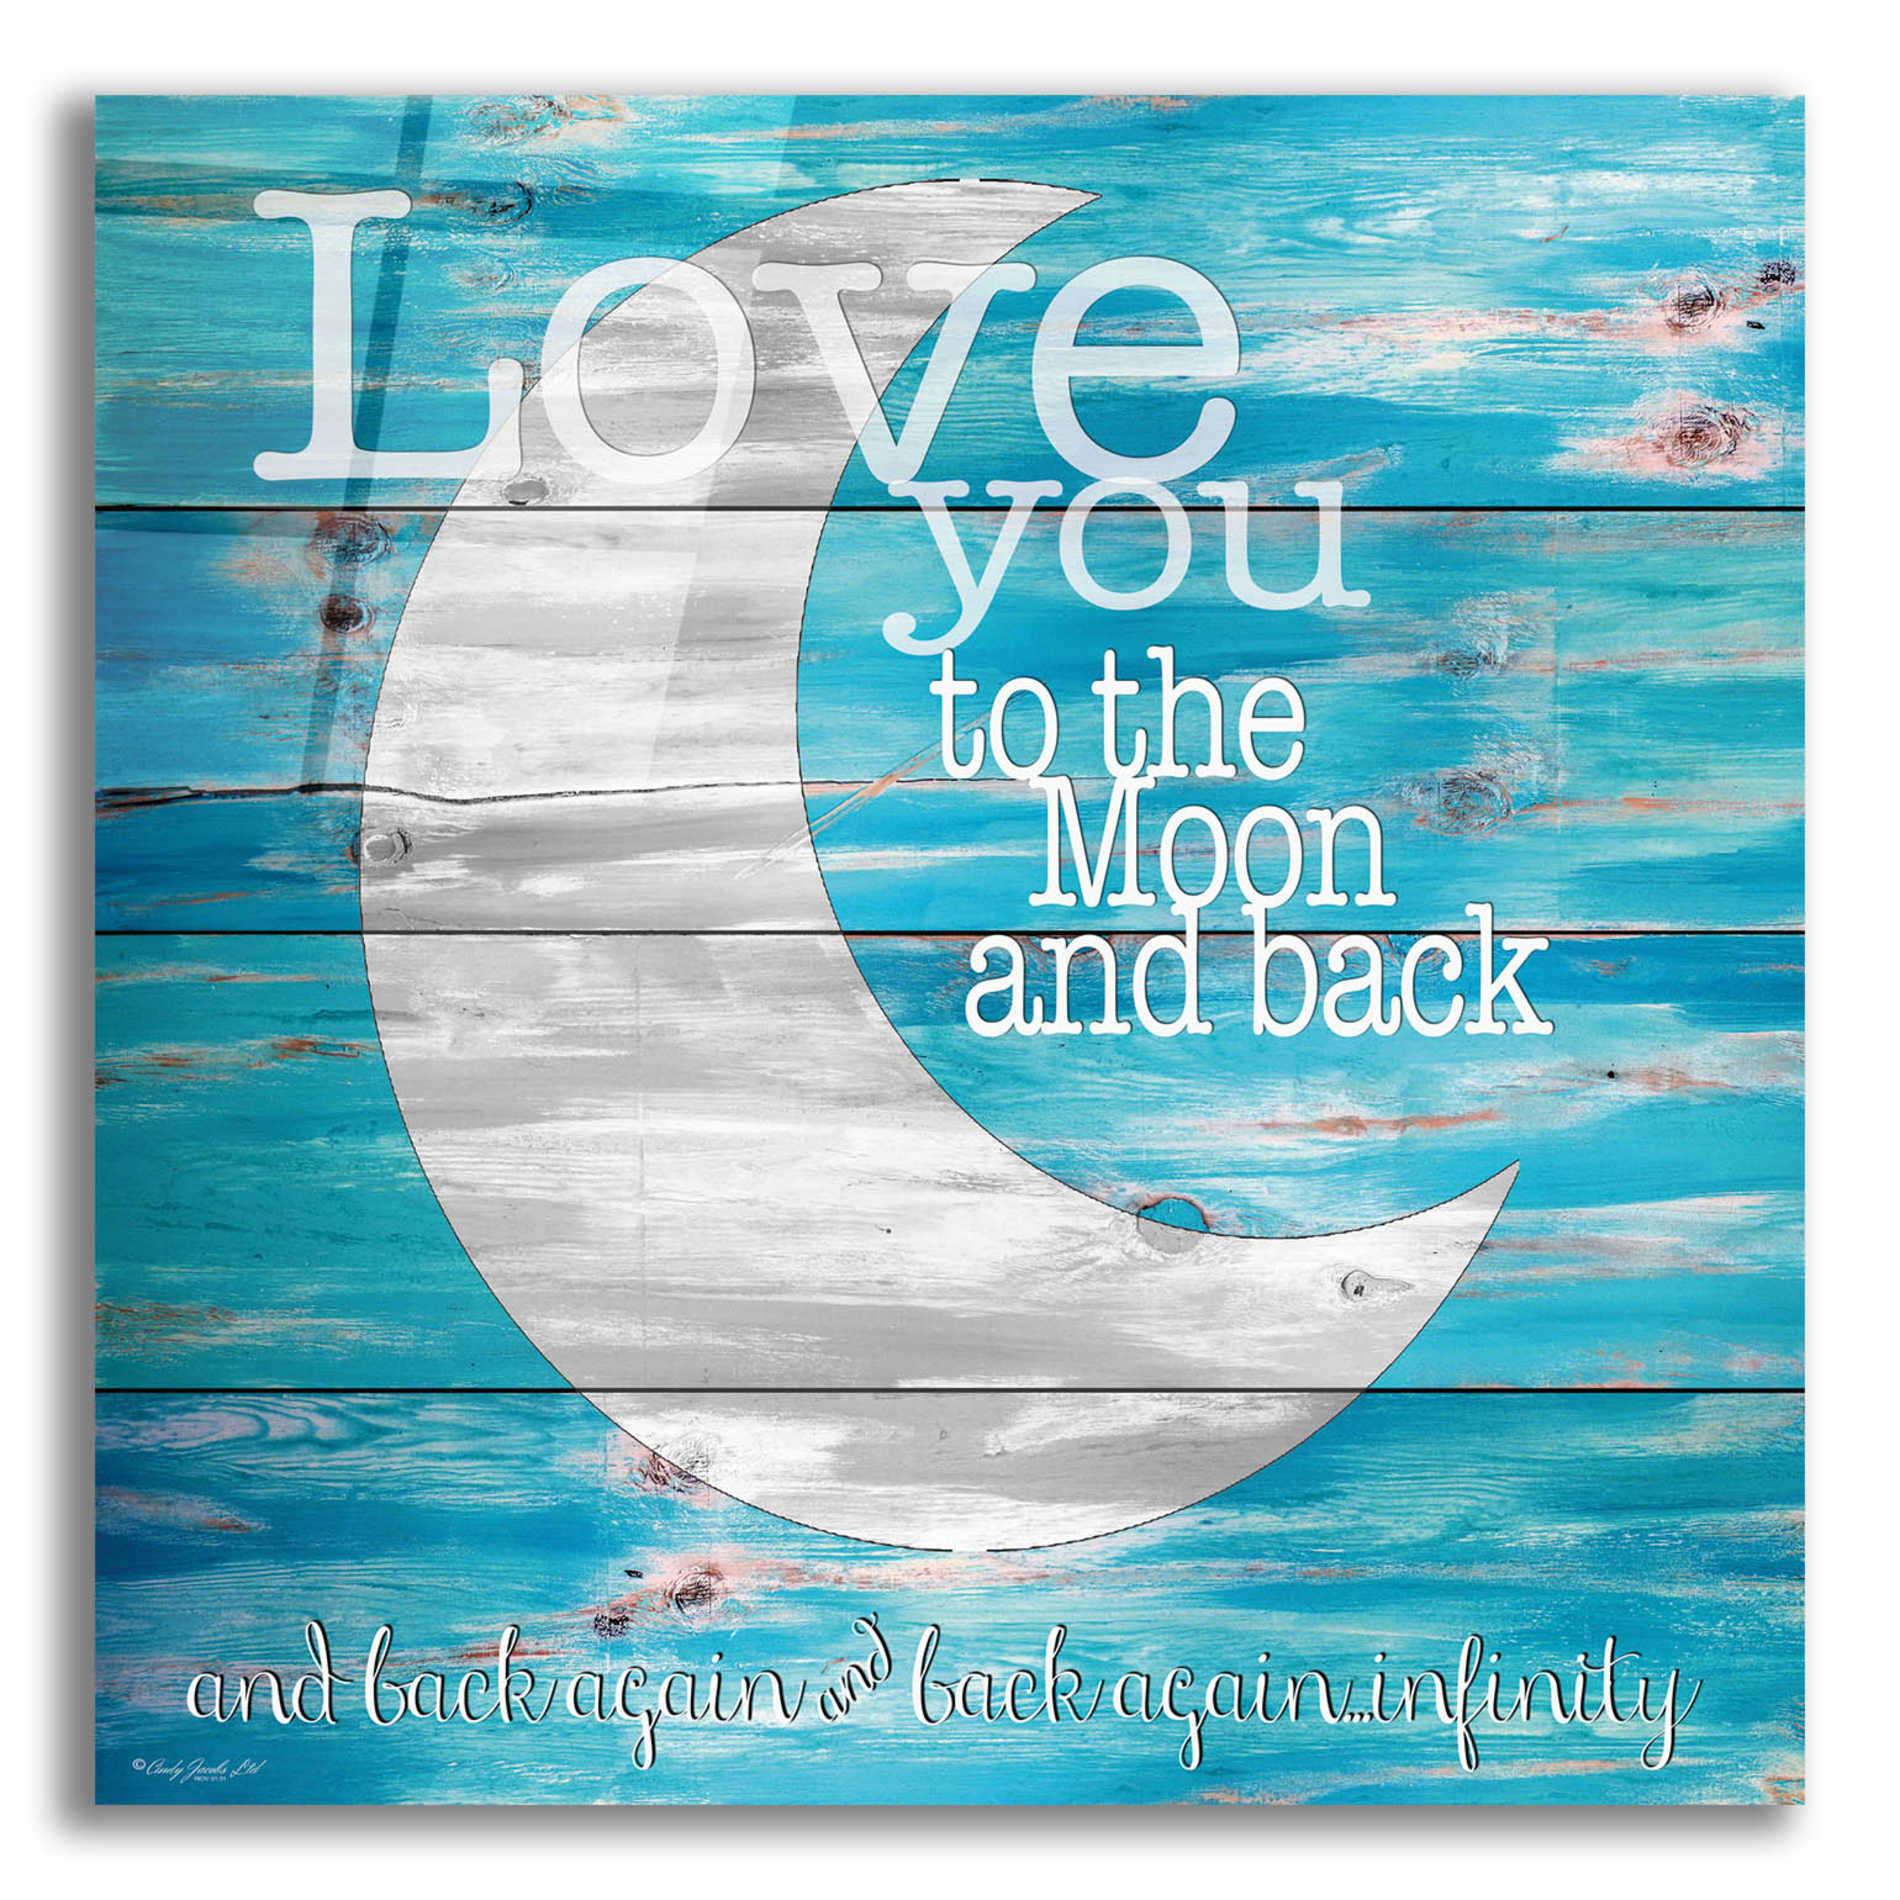 Epic Art 'Love You to the Moon and Back' by Cindy Jacobs, Acrylic Glass Wall Art,12x12